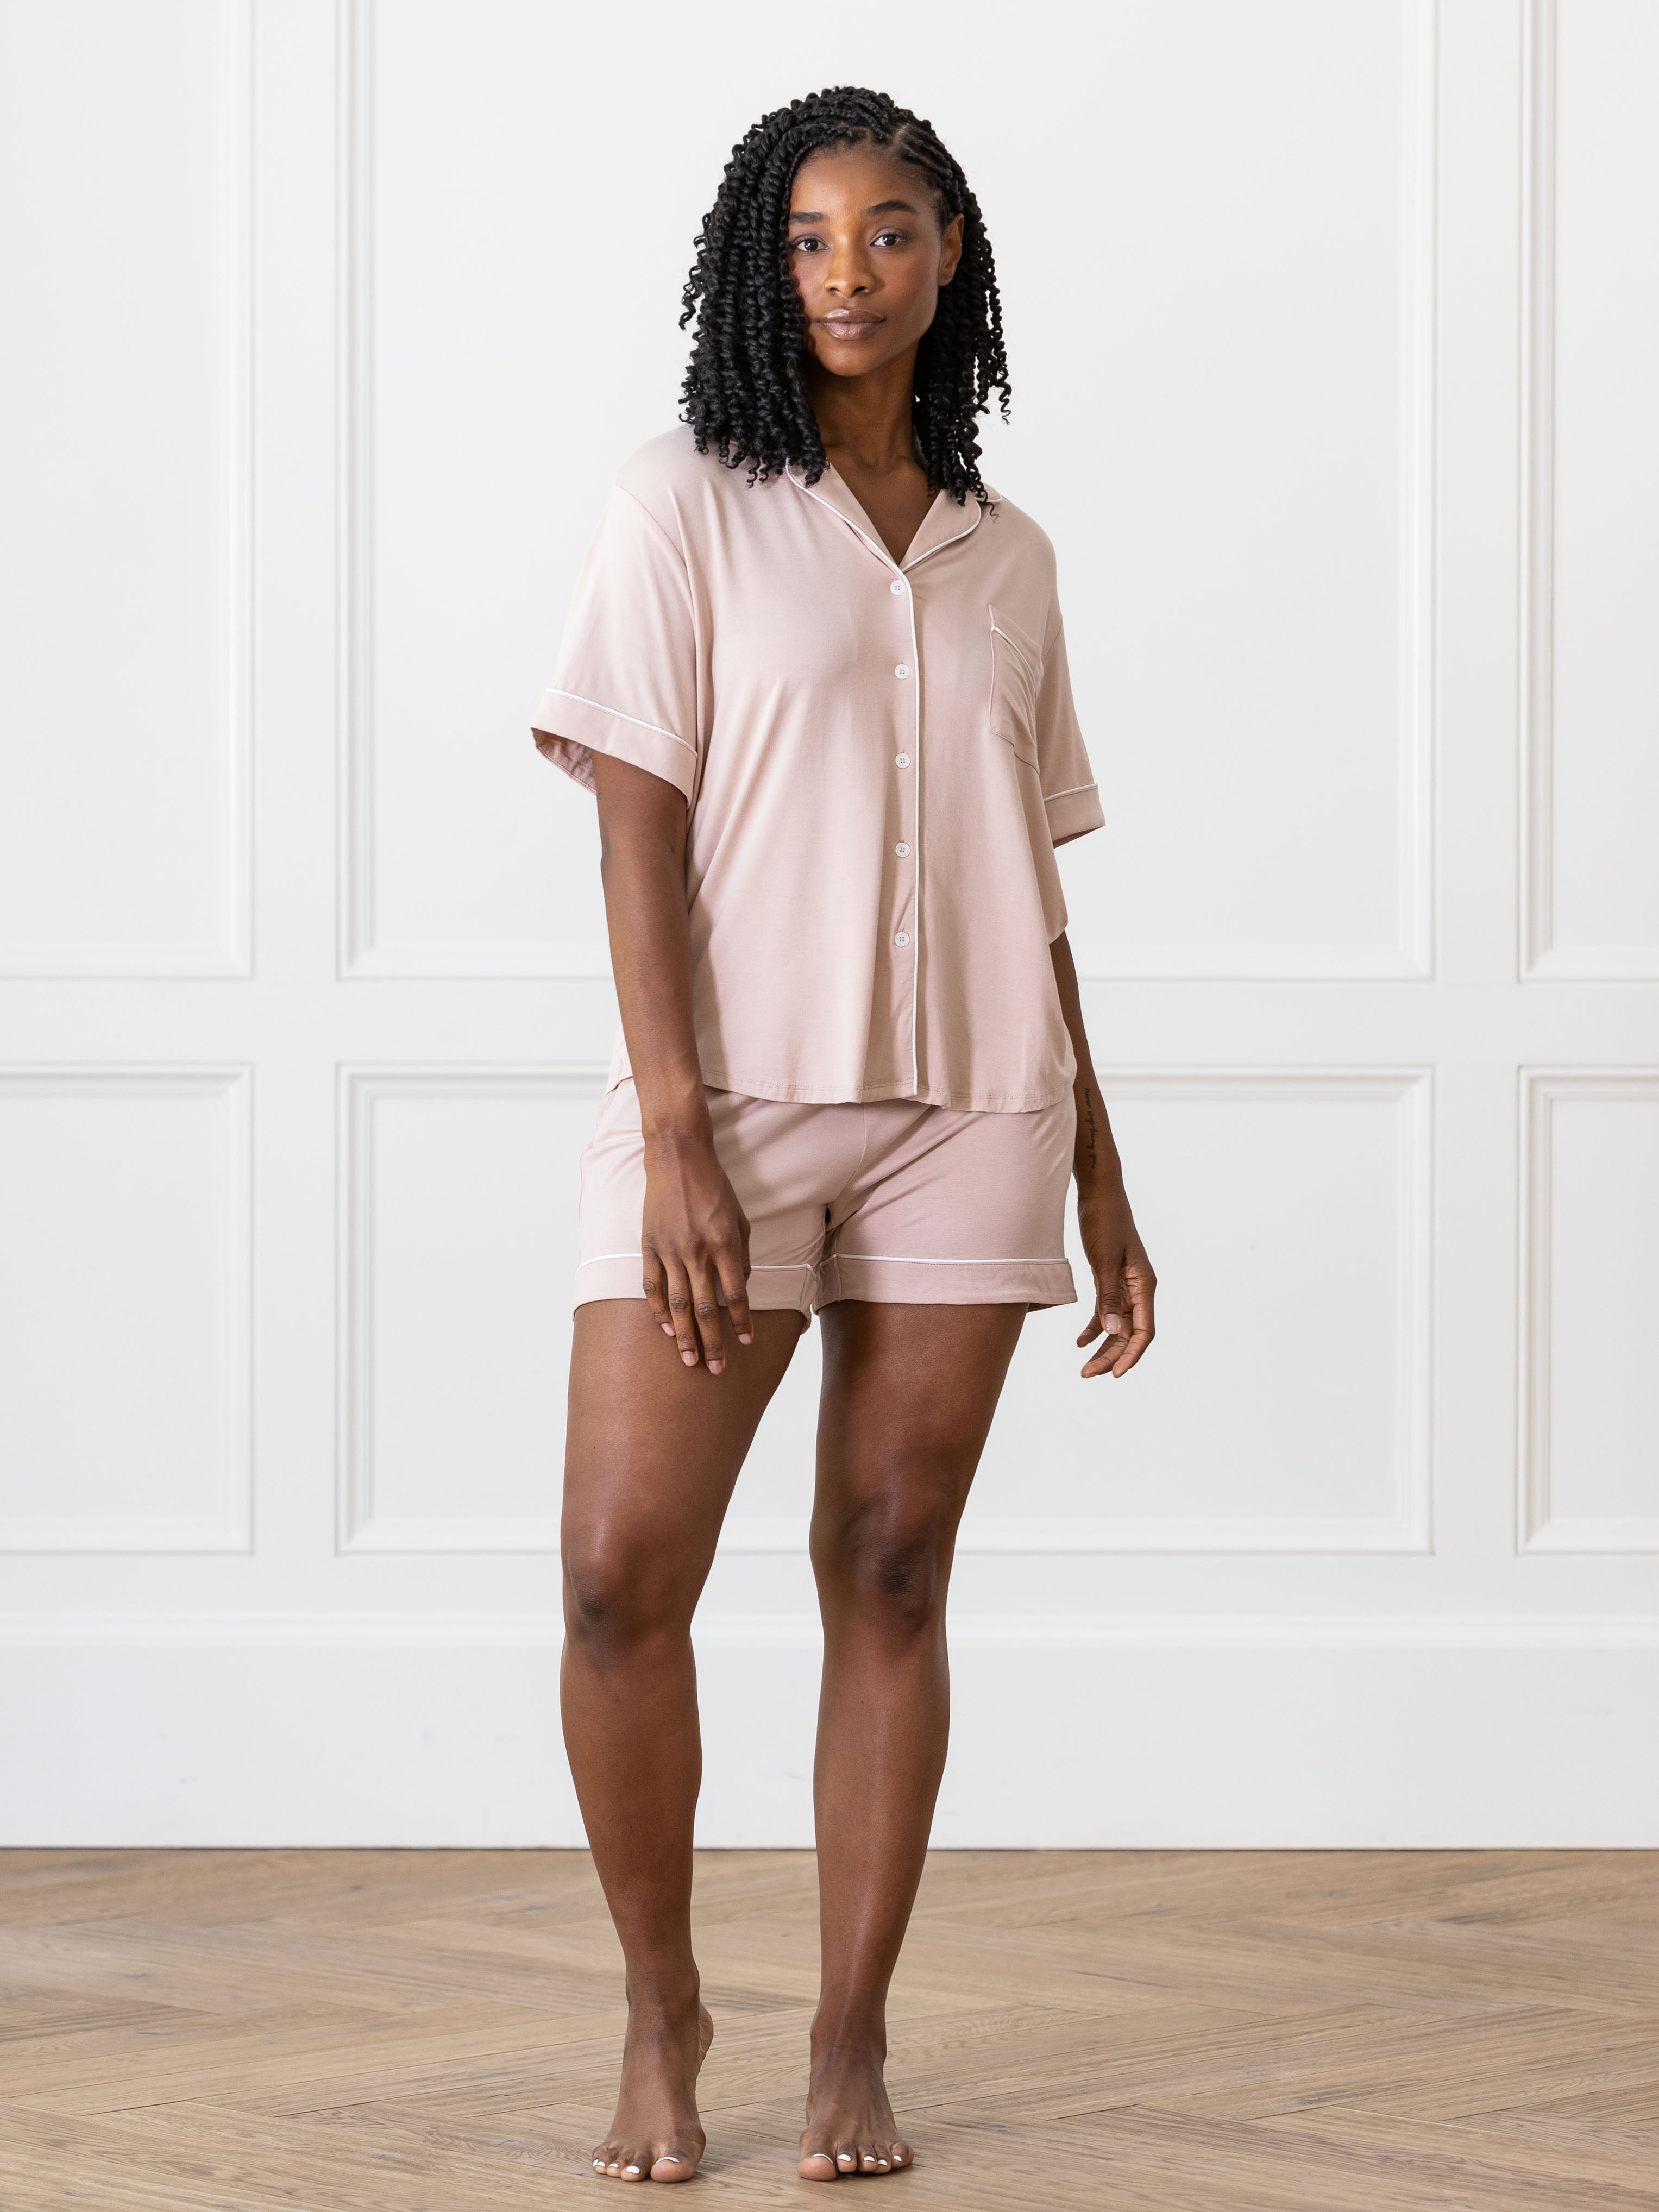 Blush Short Sleeve Pajama Set modeled by a women. The photo was taken in a light setting showing off the pajamas. |Color:Blush